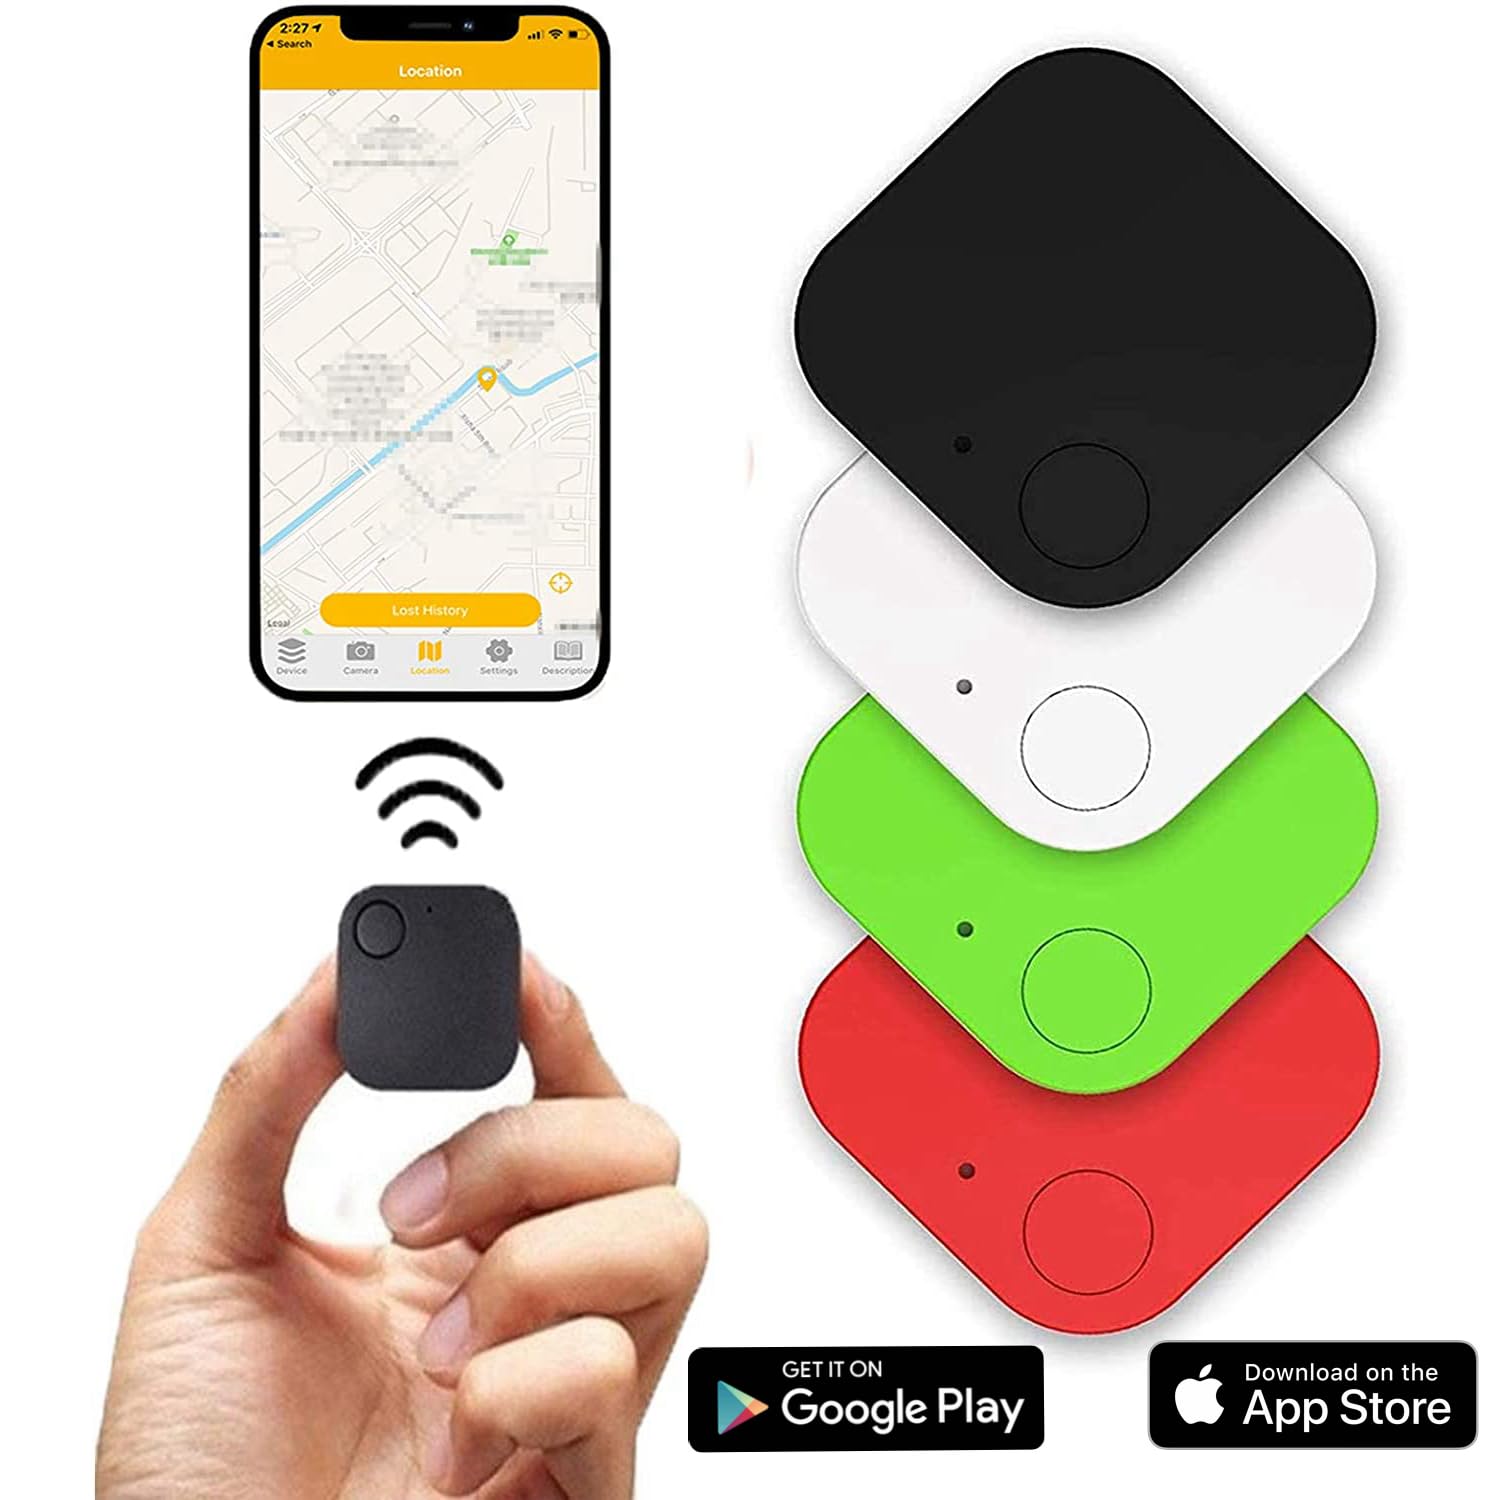 Key Finder, Bluetooth Luggage Tracker tag Locator, Wireless Key Tracker,Remote Finder Tracking Device APP Control Compatible with iOS Android for Keys, Pets, Phone, Wallet, Handbag (10)